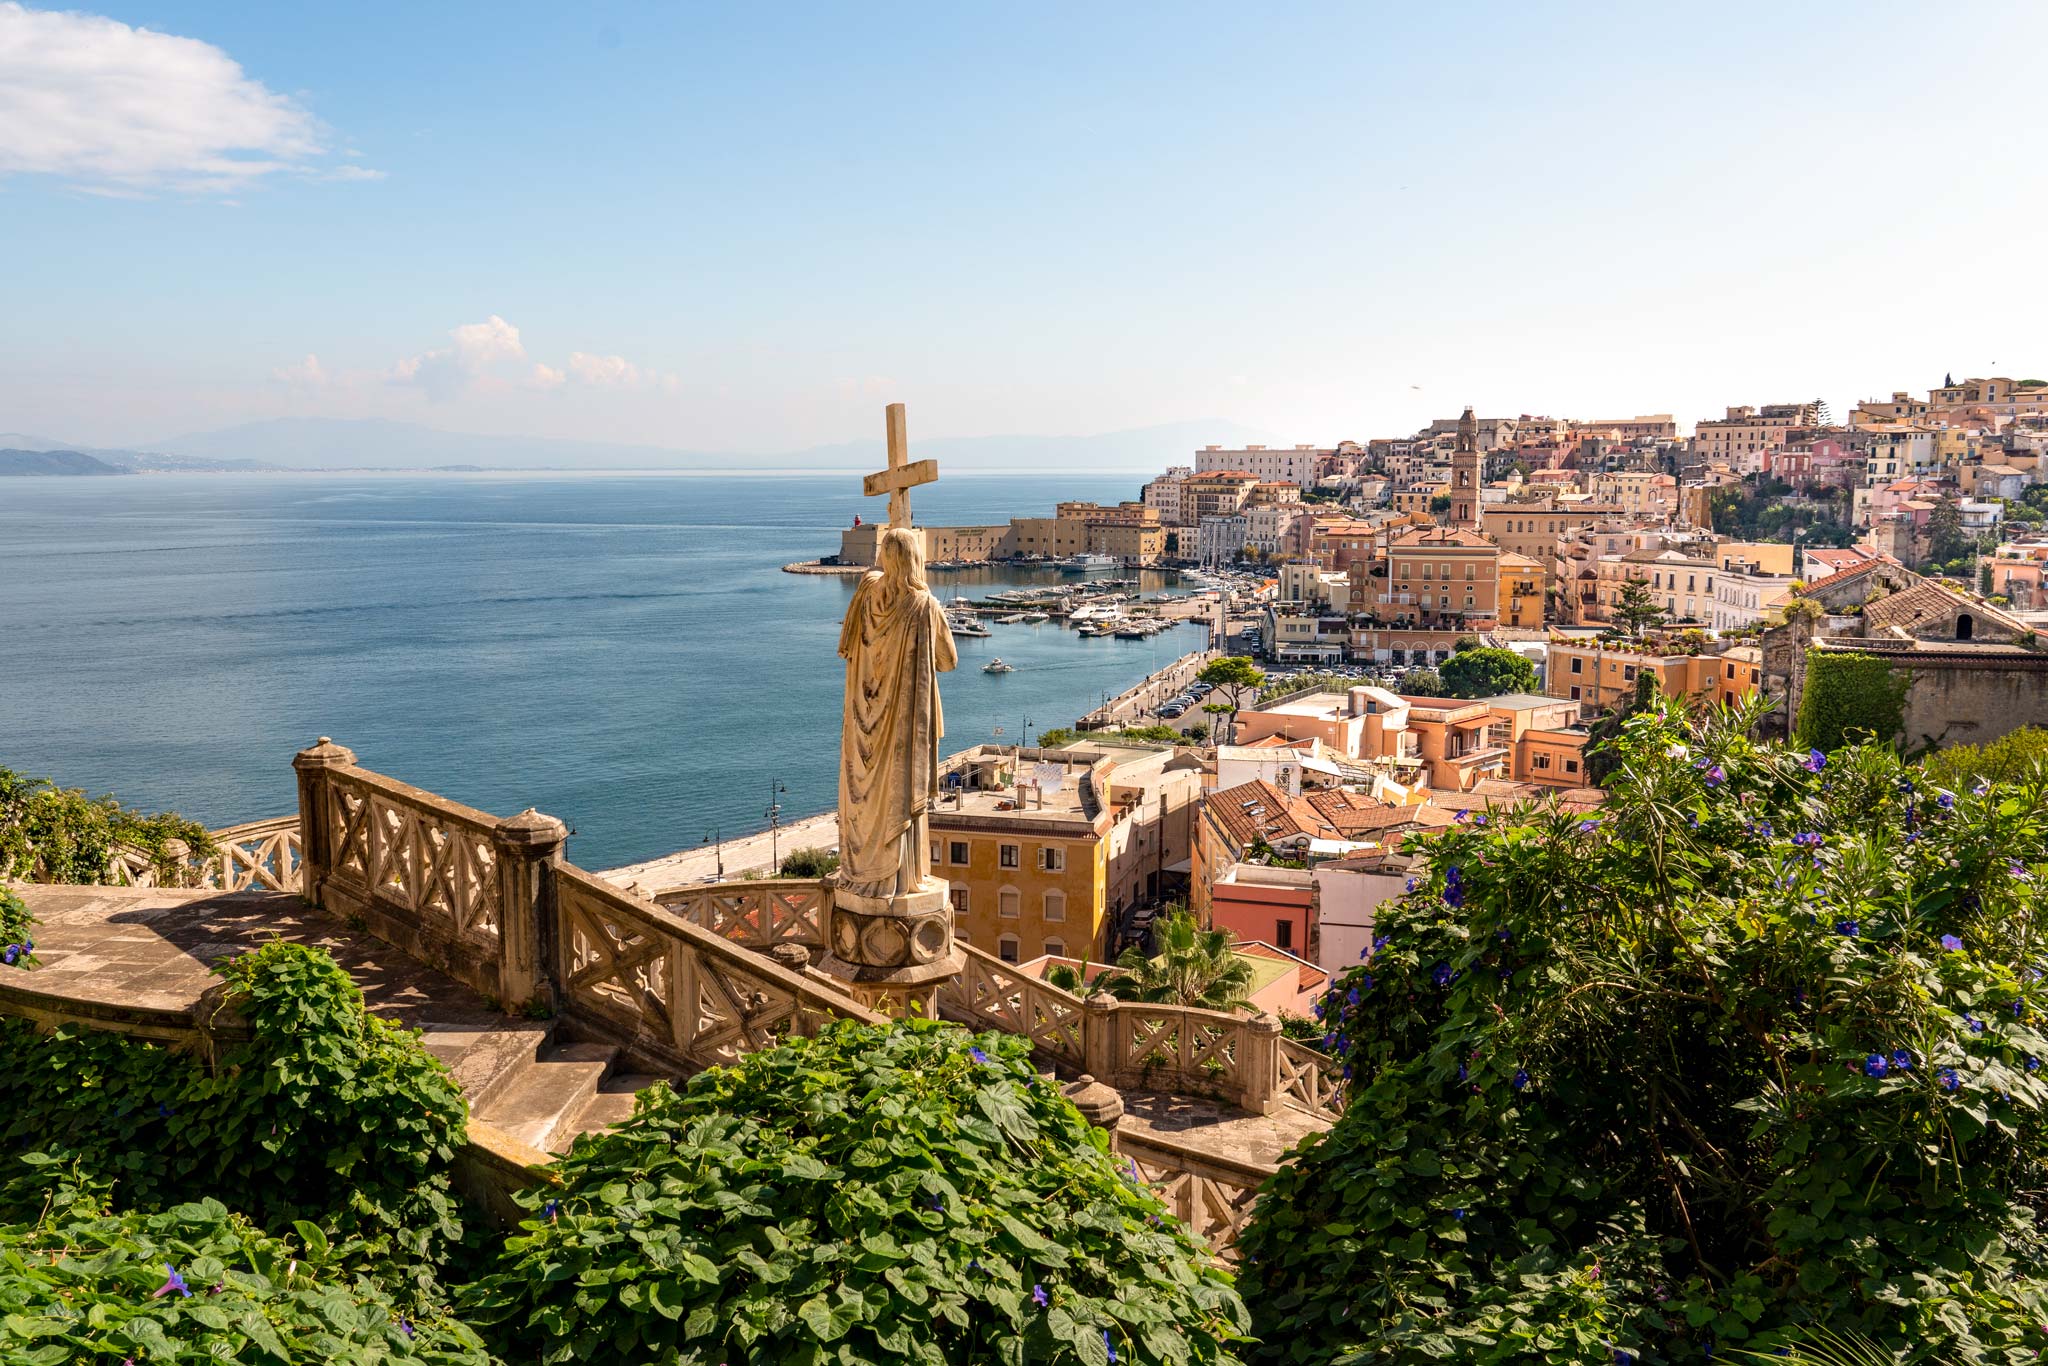 Over looking Gaeta and the sea, one of the most beautiful villages near Rome